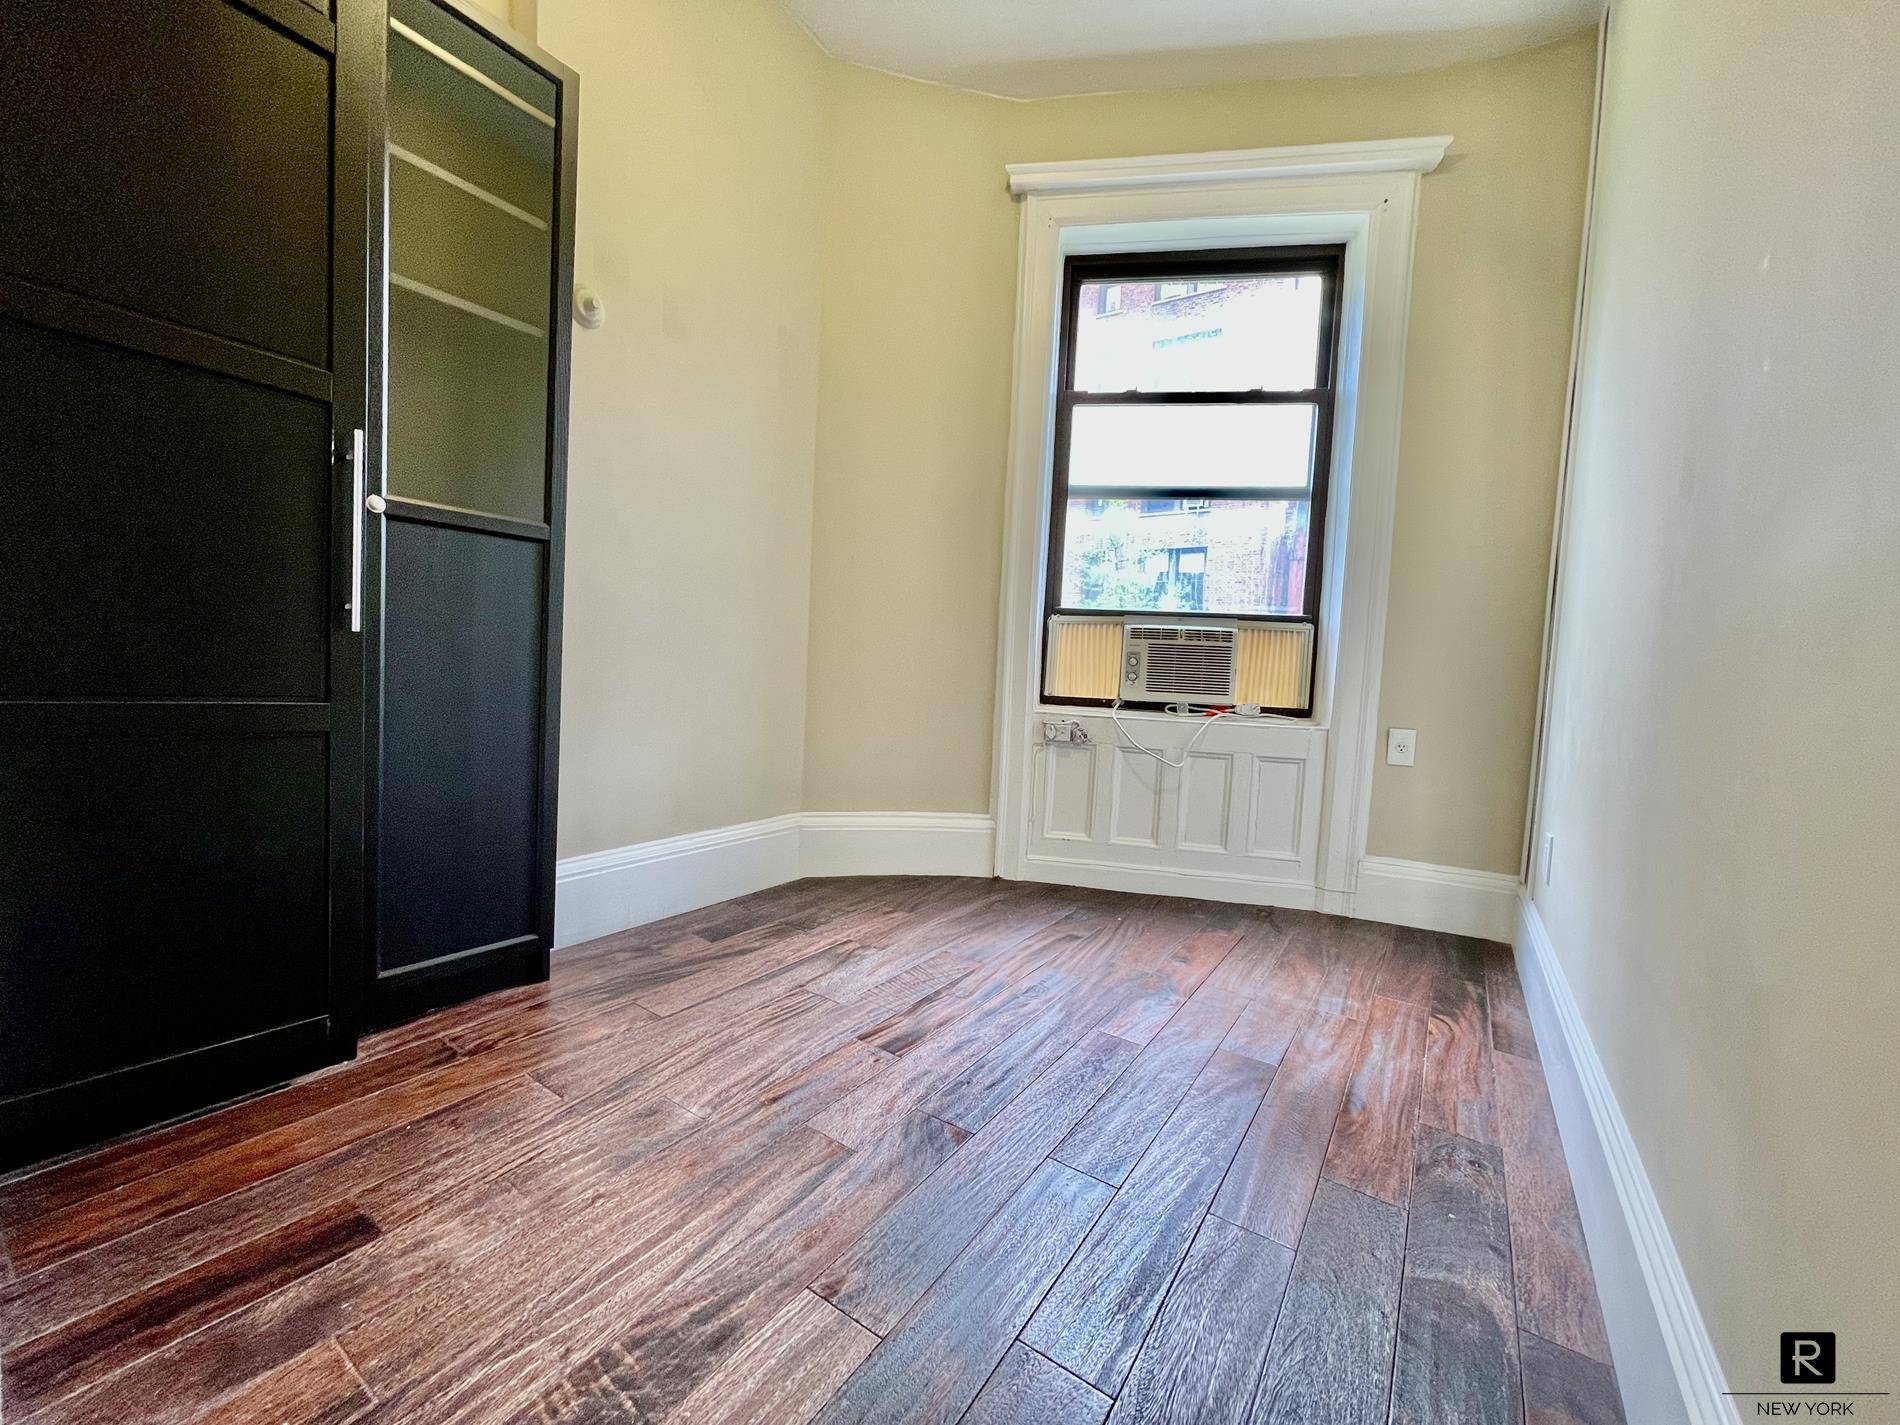 Amazing, UNBEATABLE LOCATION half a block from RIVERSIDE PARK, near the 86th st entrance for the 1 or the 93rd st entrance of the 1, 2, 3.